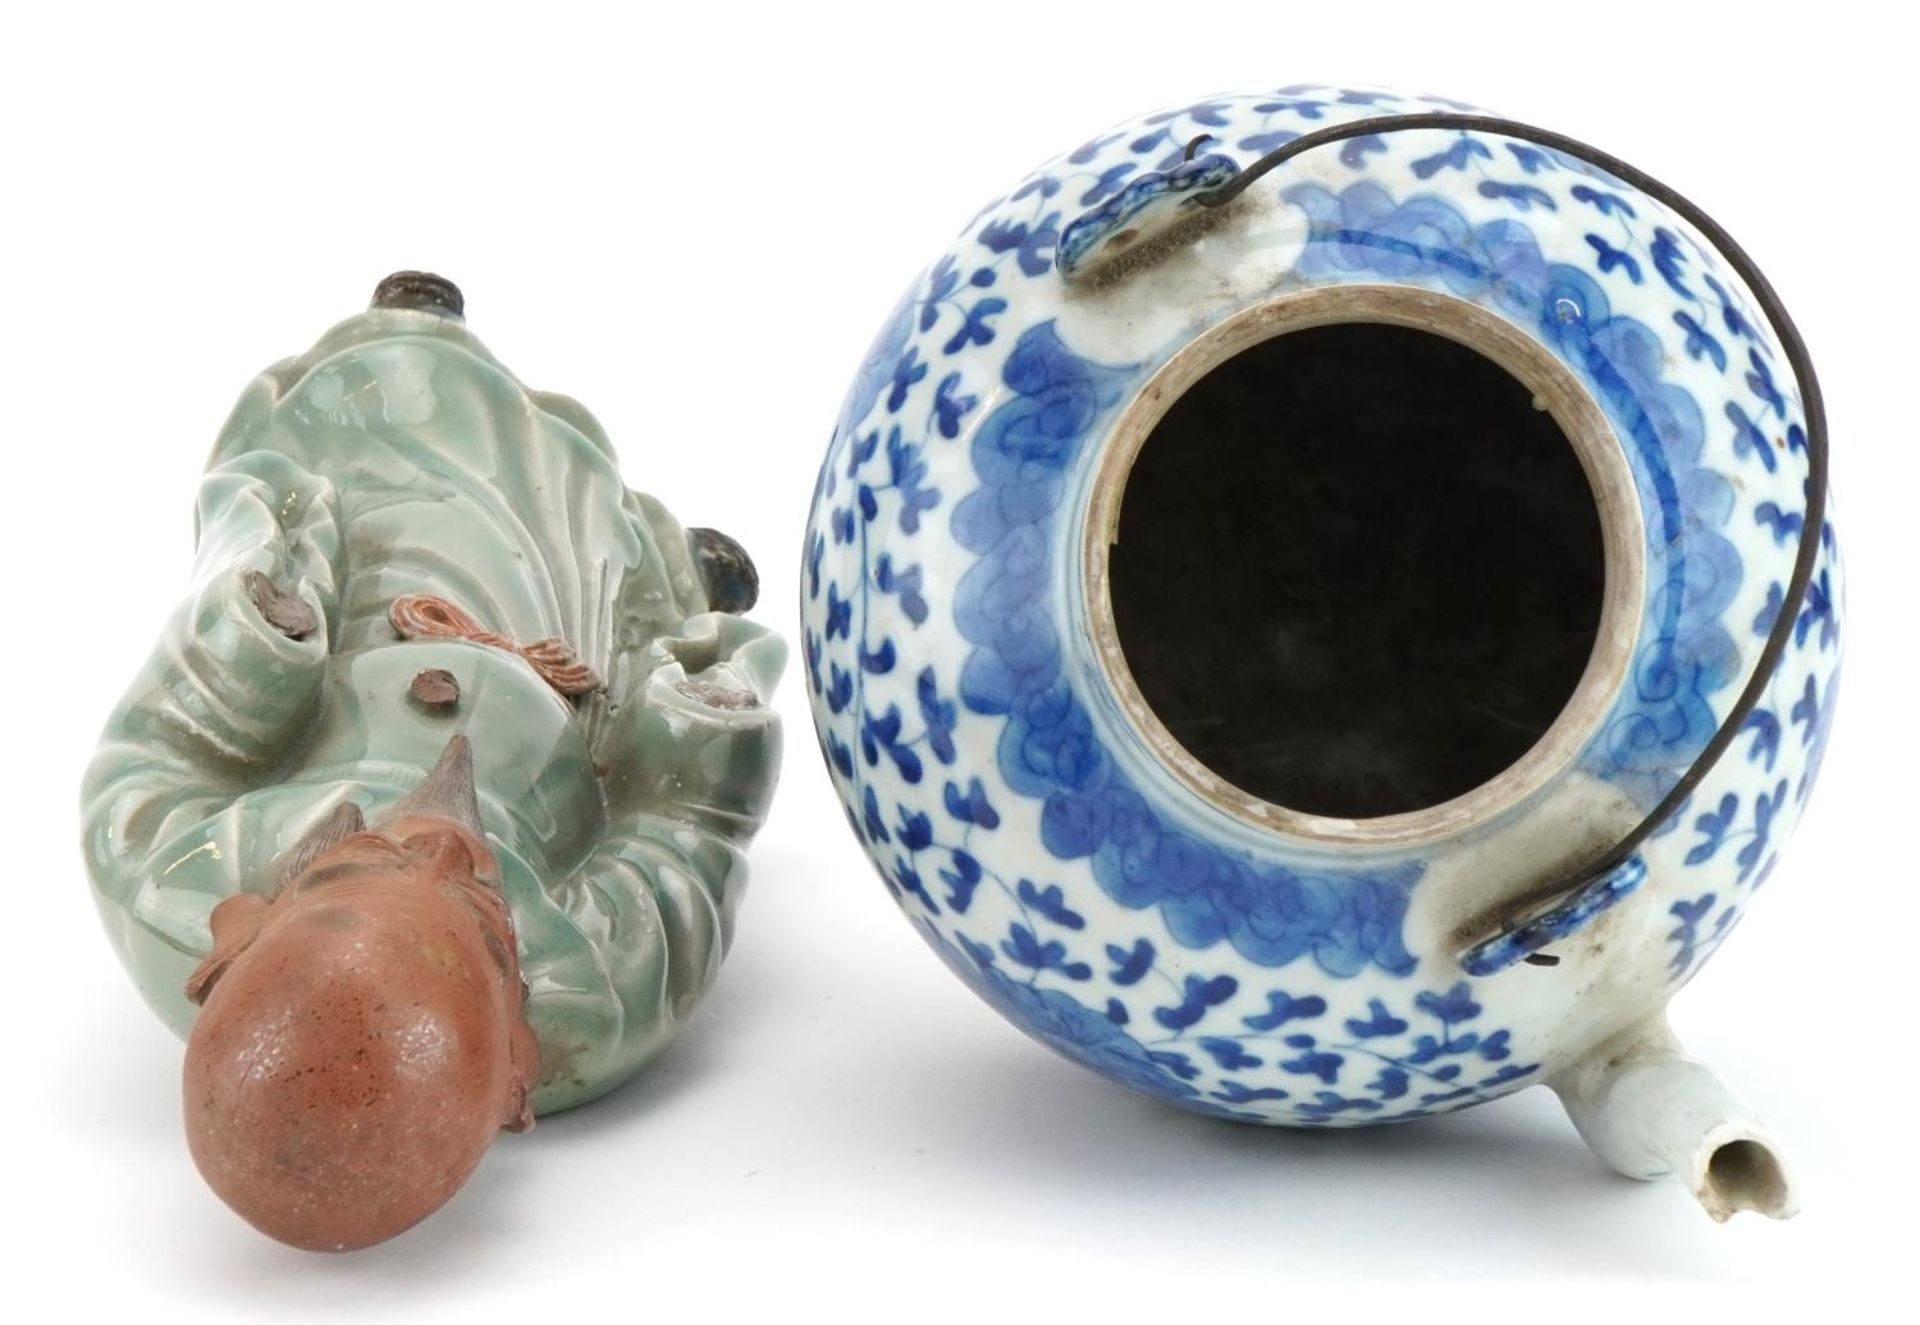 Chinese blue and white porcelain teapot and a celadon glazed figure, the largest 30cm high - Image 6 of 7